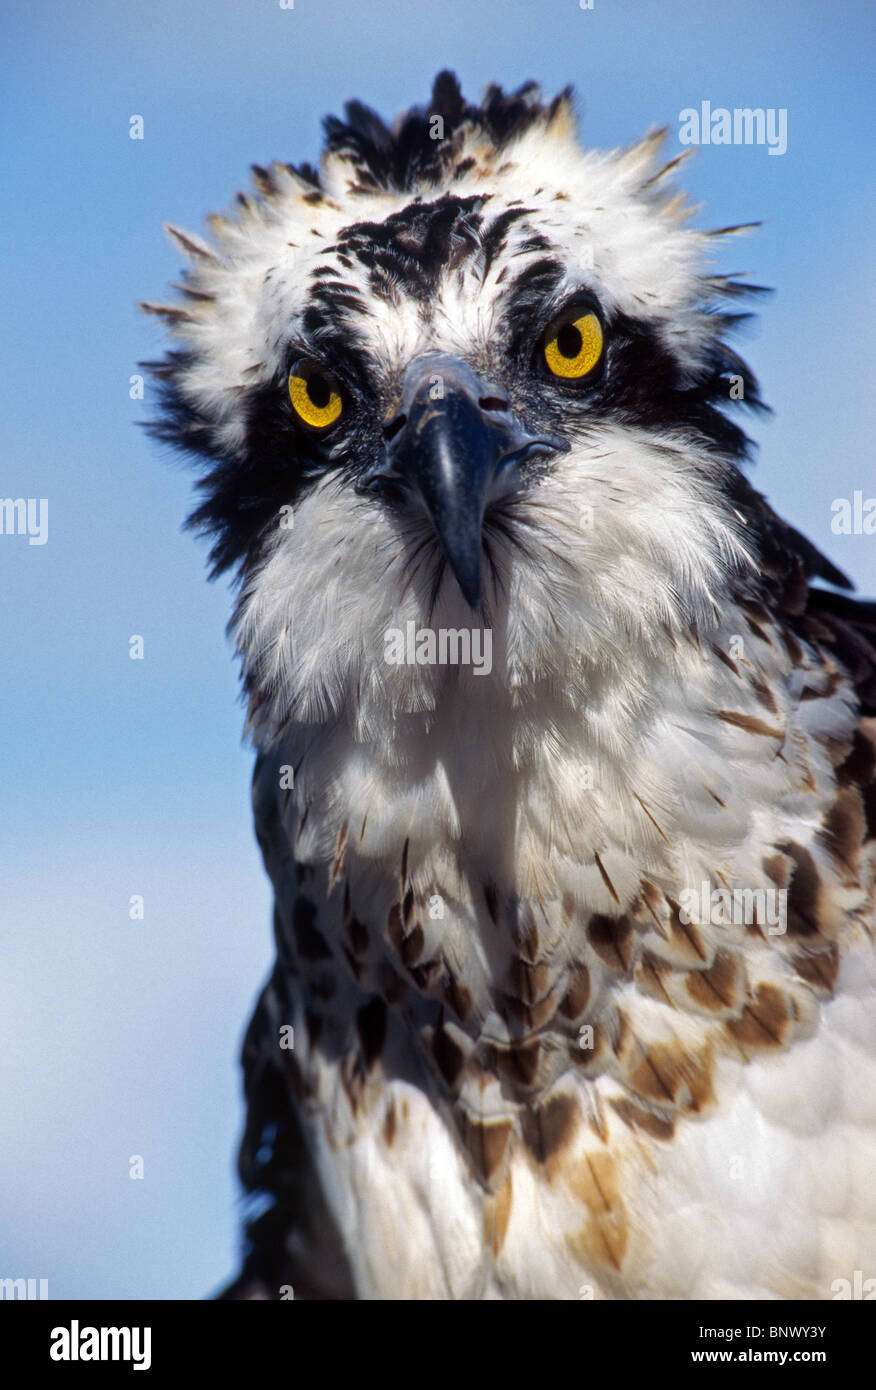 An osprey  makes a majestic raptor portrait of a fish-eating bird of prey that is also known as a fish eagle and a sea hawk. Stock Photo